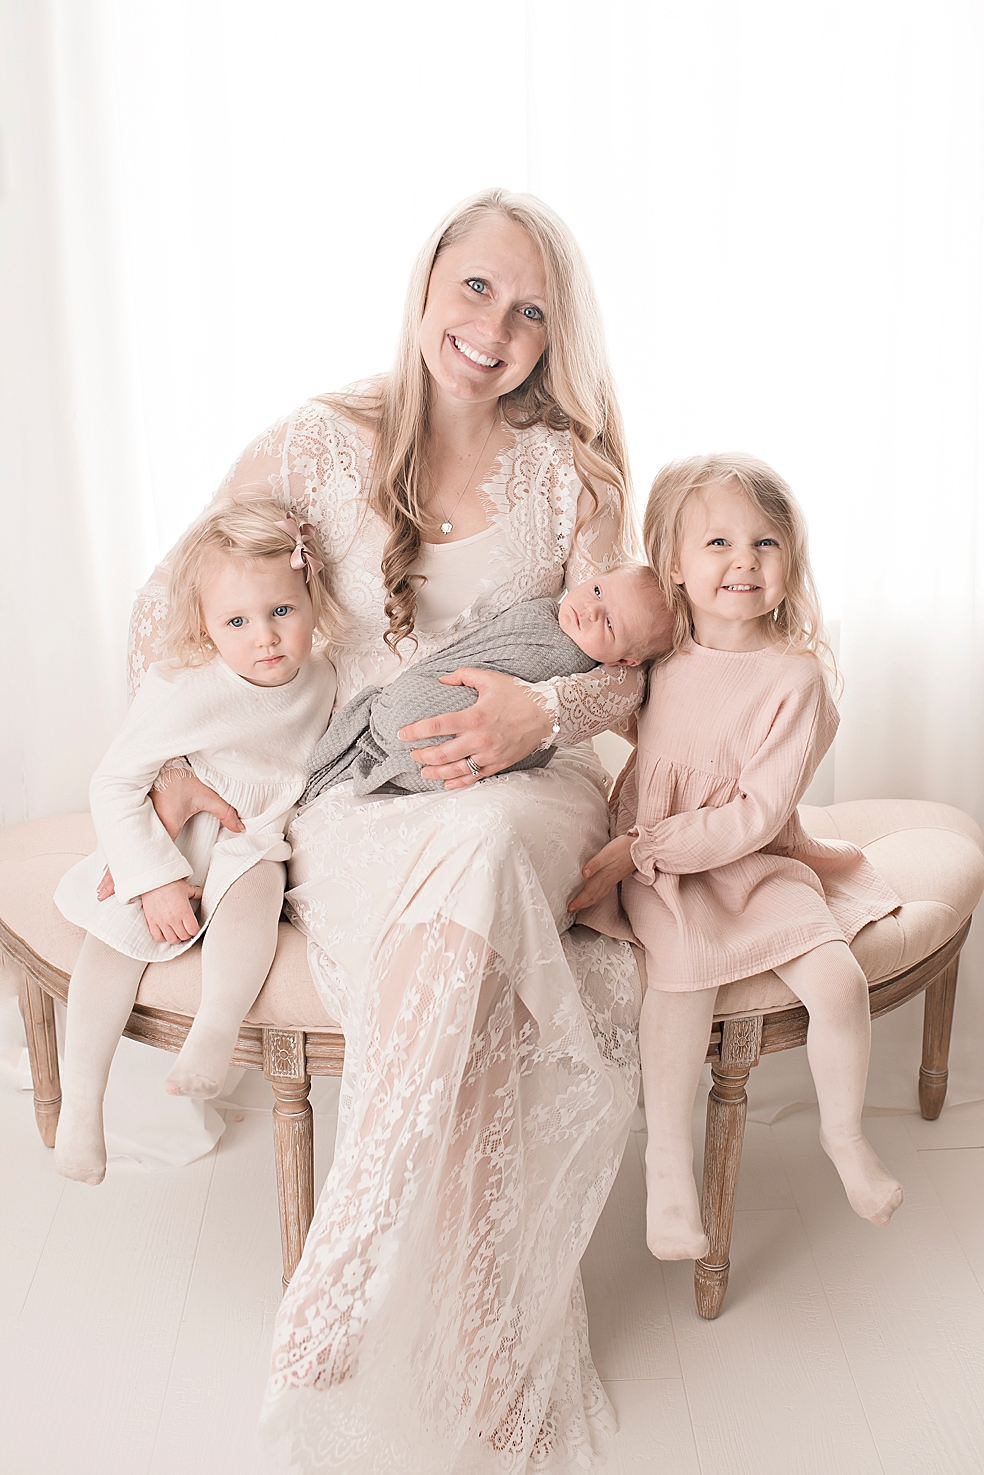 Mom and daughters holding their new baby | Photo by Jessica Lee Photography